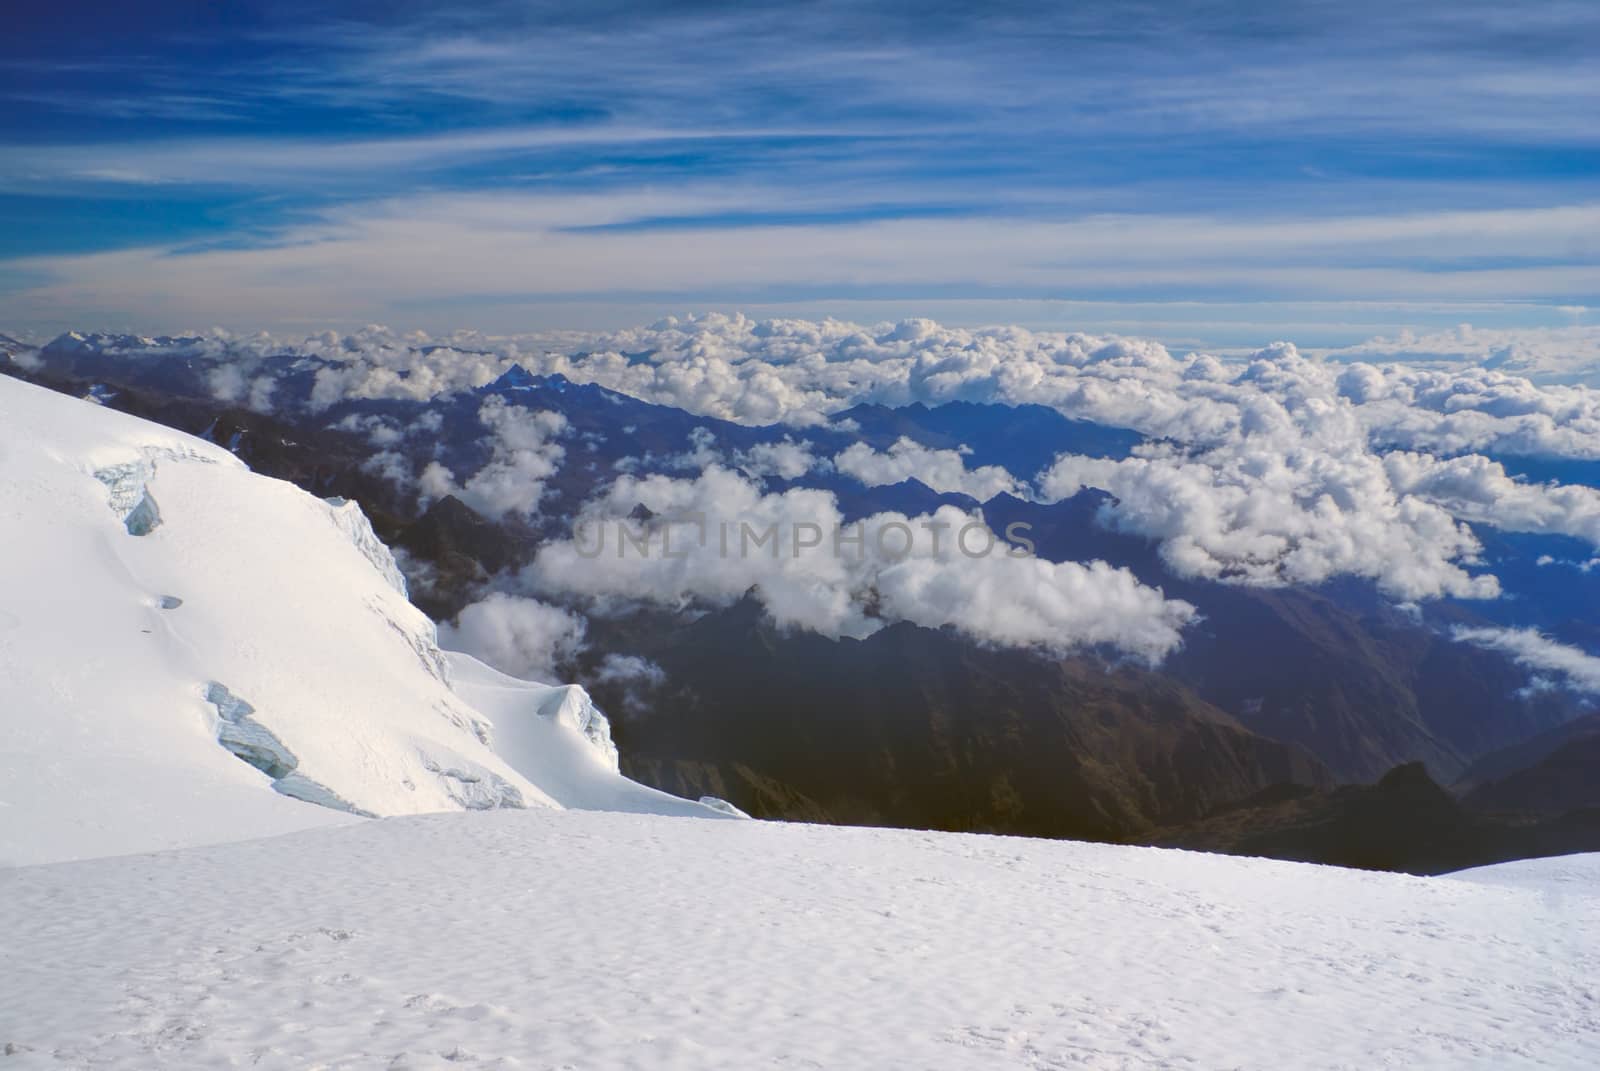 Amazing view from near top of Huayna Potosi mountain in Bolivia